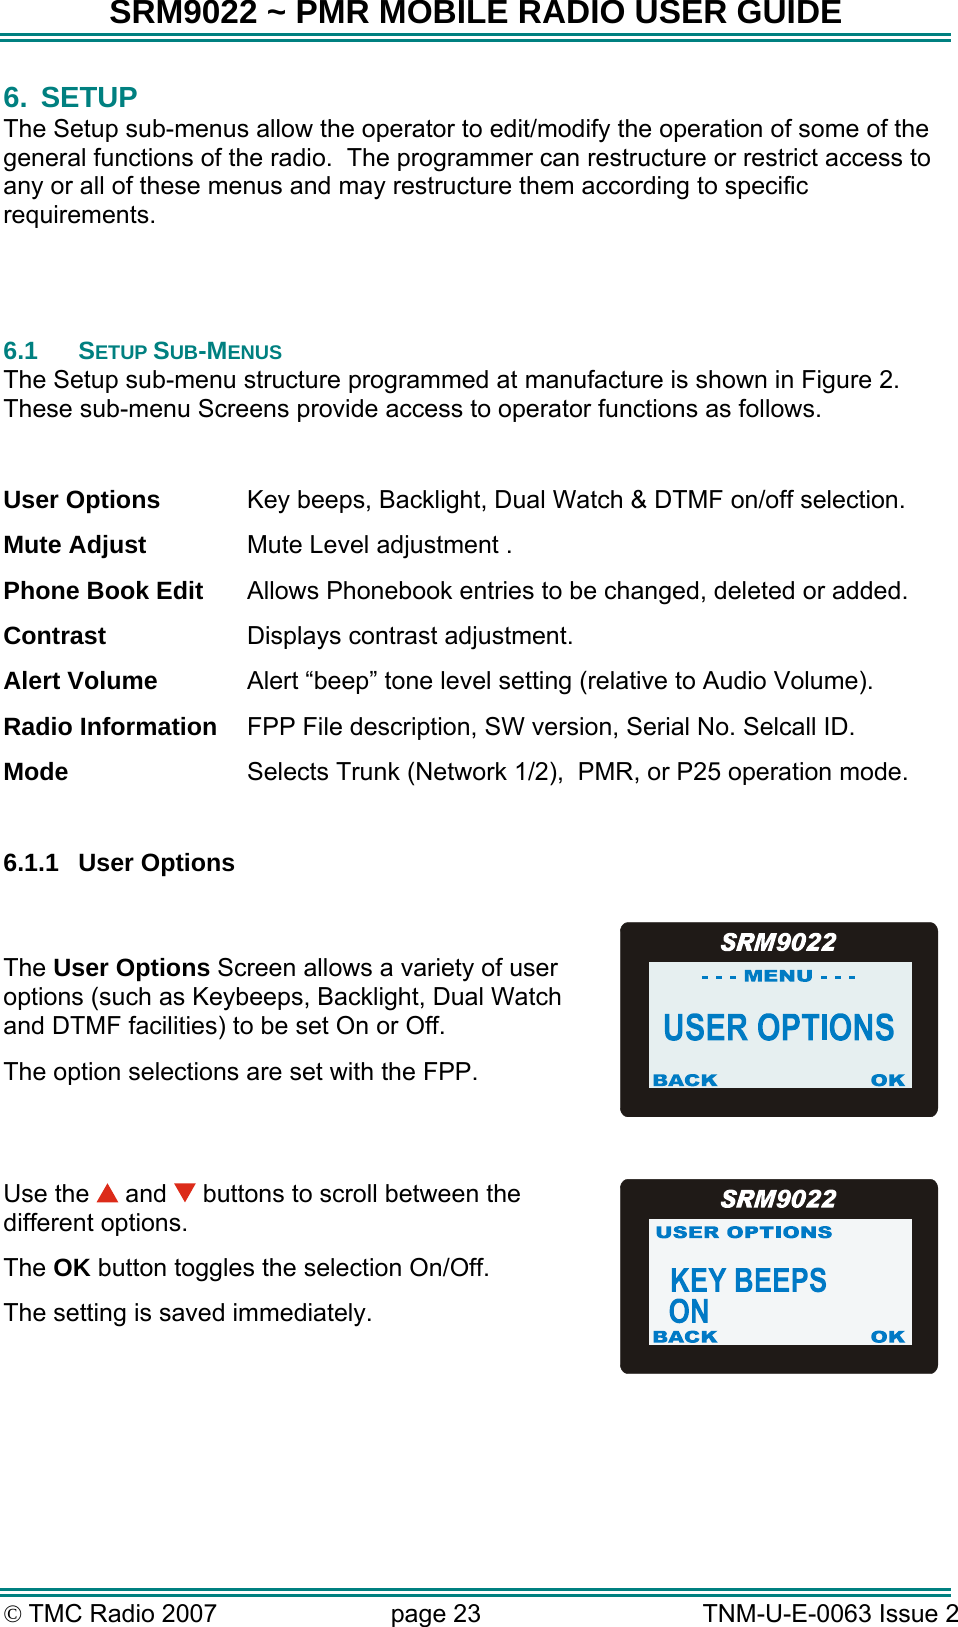 SRM9022 ~ PMR MOBILE RADIO USER GUIDE © TMC Radio 2007  page 23   TNM-U-E-0063 Issue 2 6. SETUP The Setup sub-menus allow the operator to edit/modify the operation of some of the general functions of the radio.  The programmer can restructure or restrict access to any or all of these menus and may restructure them according to specific requirements.    6.1 SETUP SUB-MENUS The Setup sub-menu structure programmed at manufacture is shown in Figure 2.  These sub-menu Screens provide access to operator functions as follows.  User Options  Key beeps, Backlight, Dual Watch &amp; DTMF on/off selection. Mute Adjust  Mute Level adjustment . Phone Book Edit  Allows Phonebook entries to be changed, deleted or added. Contrast  Displays contrast adjustment. Alert Volume  Alert “beep” tone level setting (relative to Audio Volume). Radio Information  FPP File description, SW version, Serial No. Selcall ID. Mode  Selects Trunk (Network 1/2),  PMR, or P25 operation mode.  6.1.1 User Options  The User Options Screen allows a variety of user options (such as Keybeeps, Backlight, Dual Watch and DTMF facilities) to be set On or Off. The option selections are set with the FPP.  Use the   and   buttons to scroll between the different options. The OK button toggles the selection On/Off.   The setting is saved immediately.  